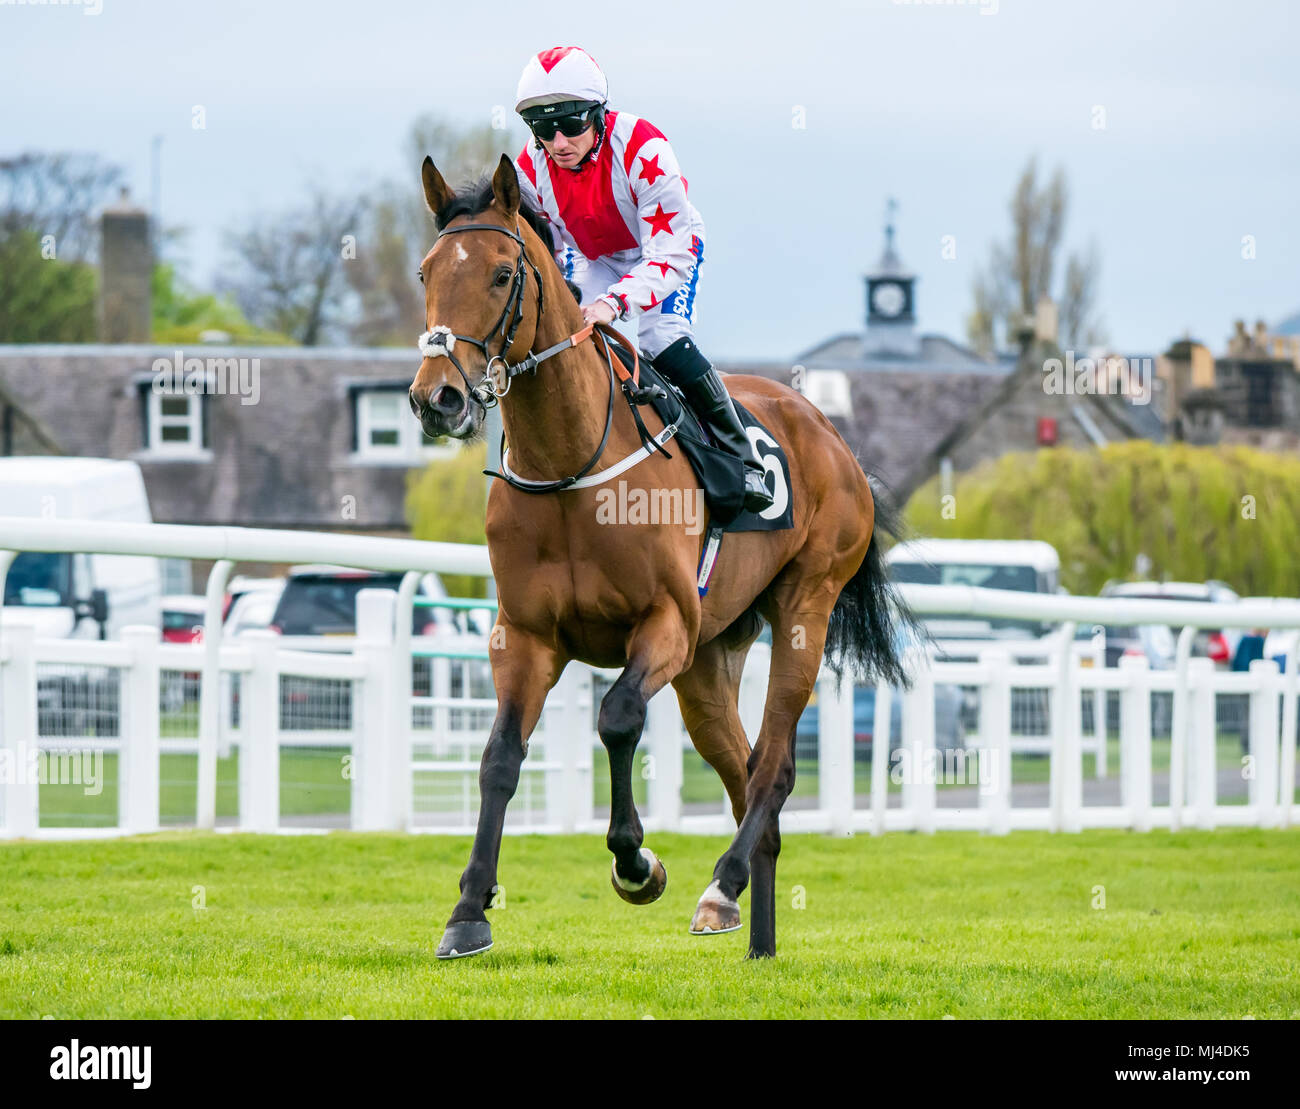 Musselburgh, Scotland, 4 May 2018. Musselburgh Race Course, Musselburgh, East Lothian, Scotland, United Kingdom. A race horse gallops to the start at the afternoon flat horse racing meet. Horse ‘Dubai Acclaim’ ridden by jockey Paul Hanagan Stock Photo